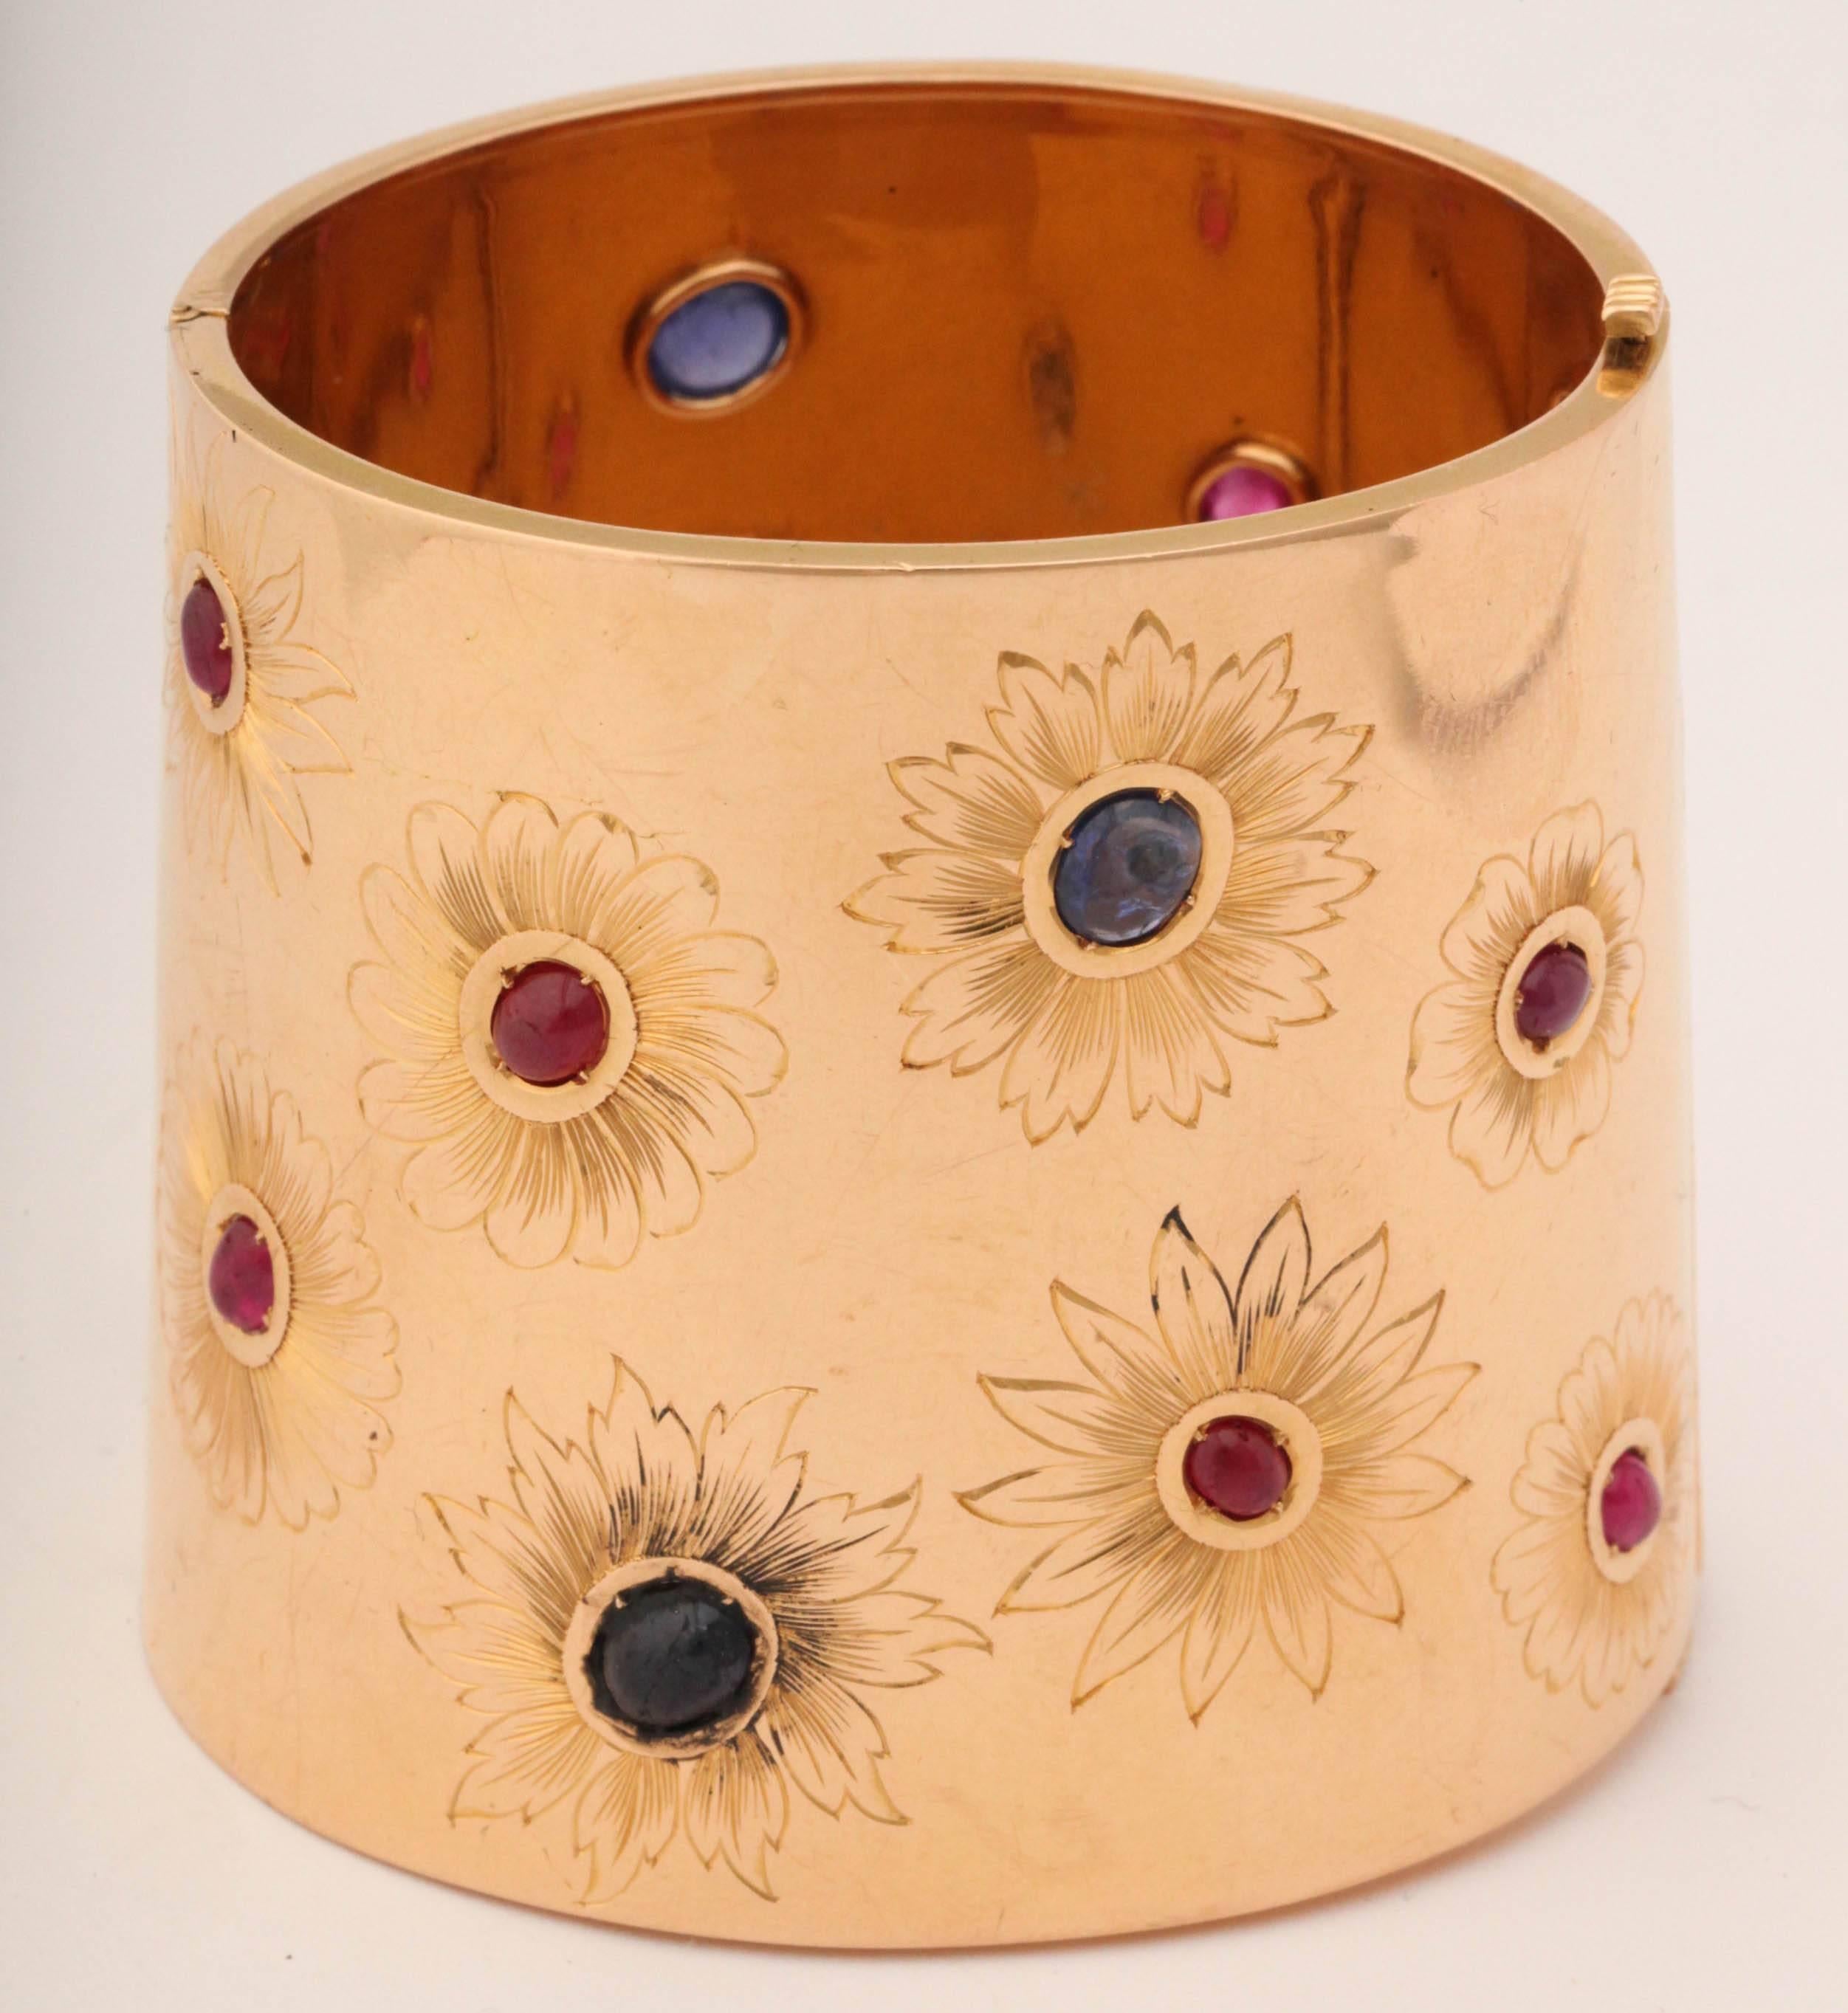 Magnificent 18kt Rise Gold Cuff - no marks - Perhaps 40's French -Cuff set with Bezel set Cabochon Rubies & Sapphires - embellished by stylized Engraved Flowers.  Had to have been a Pair or at least should have been   What Luxe.  Hinged closing.